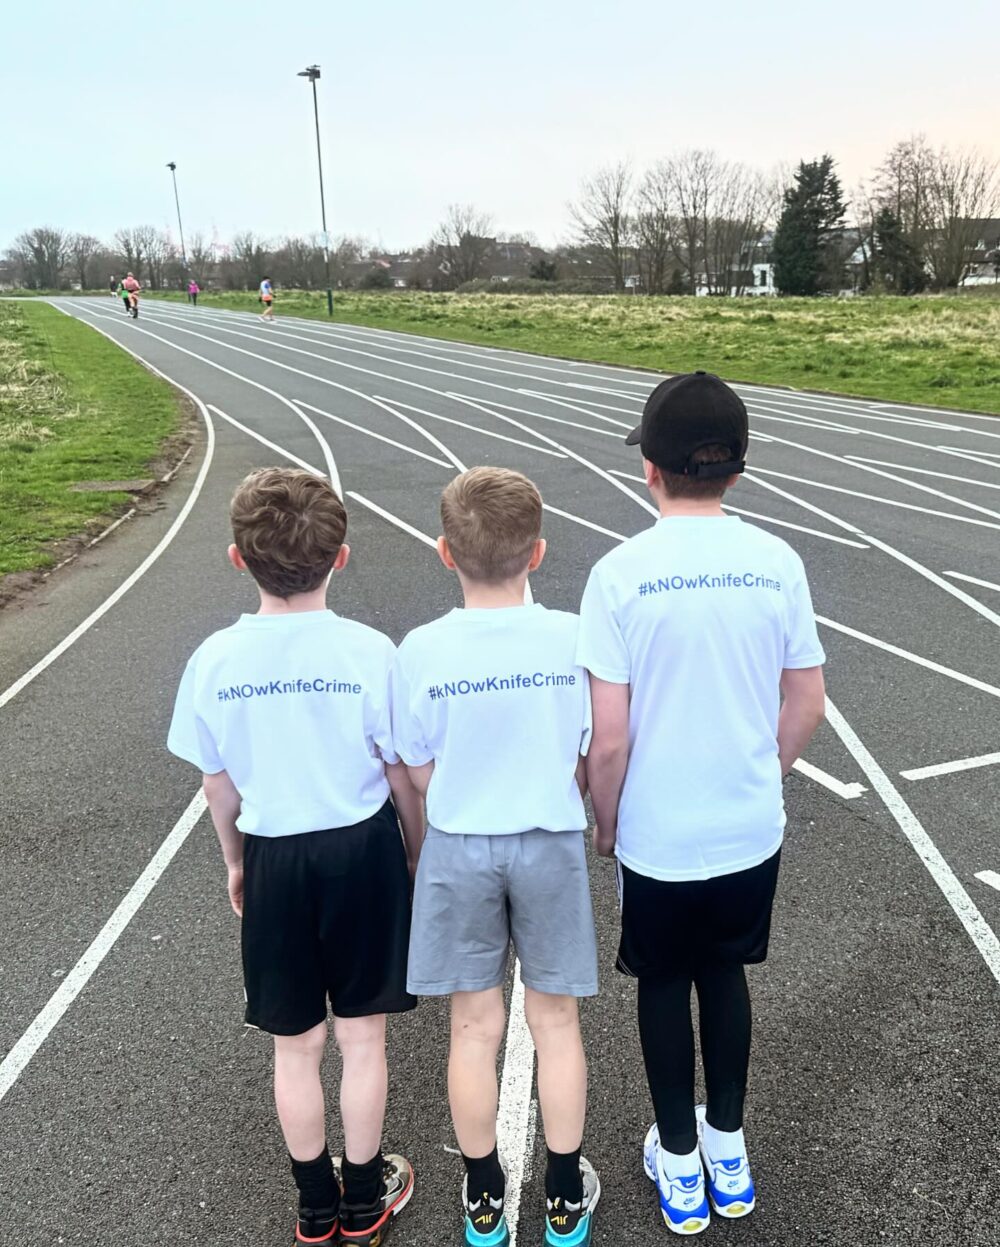 Sefton schoolchildren to take part in massive relay race in stand against knife crime